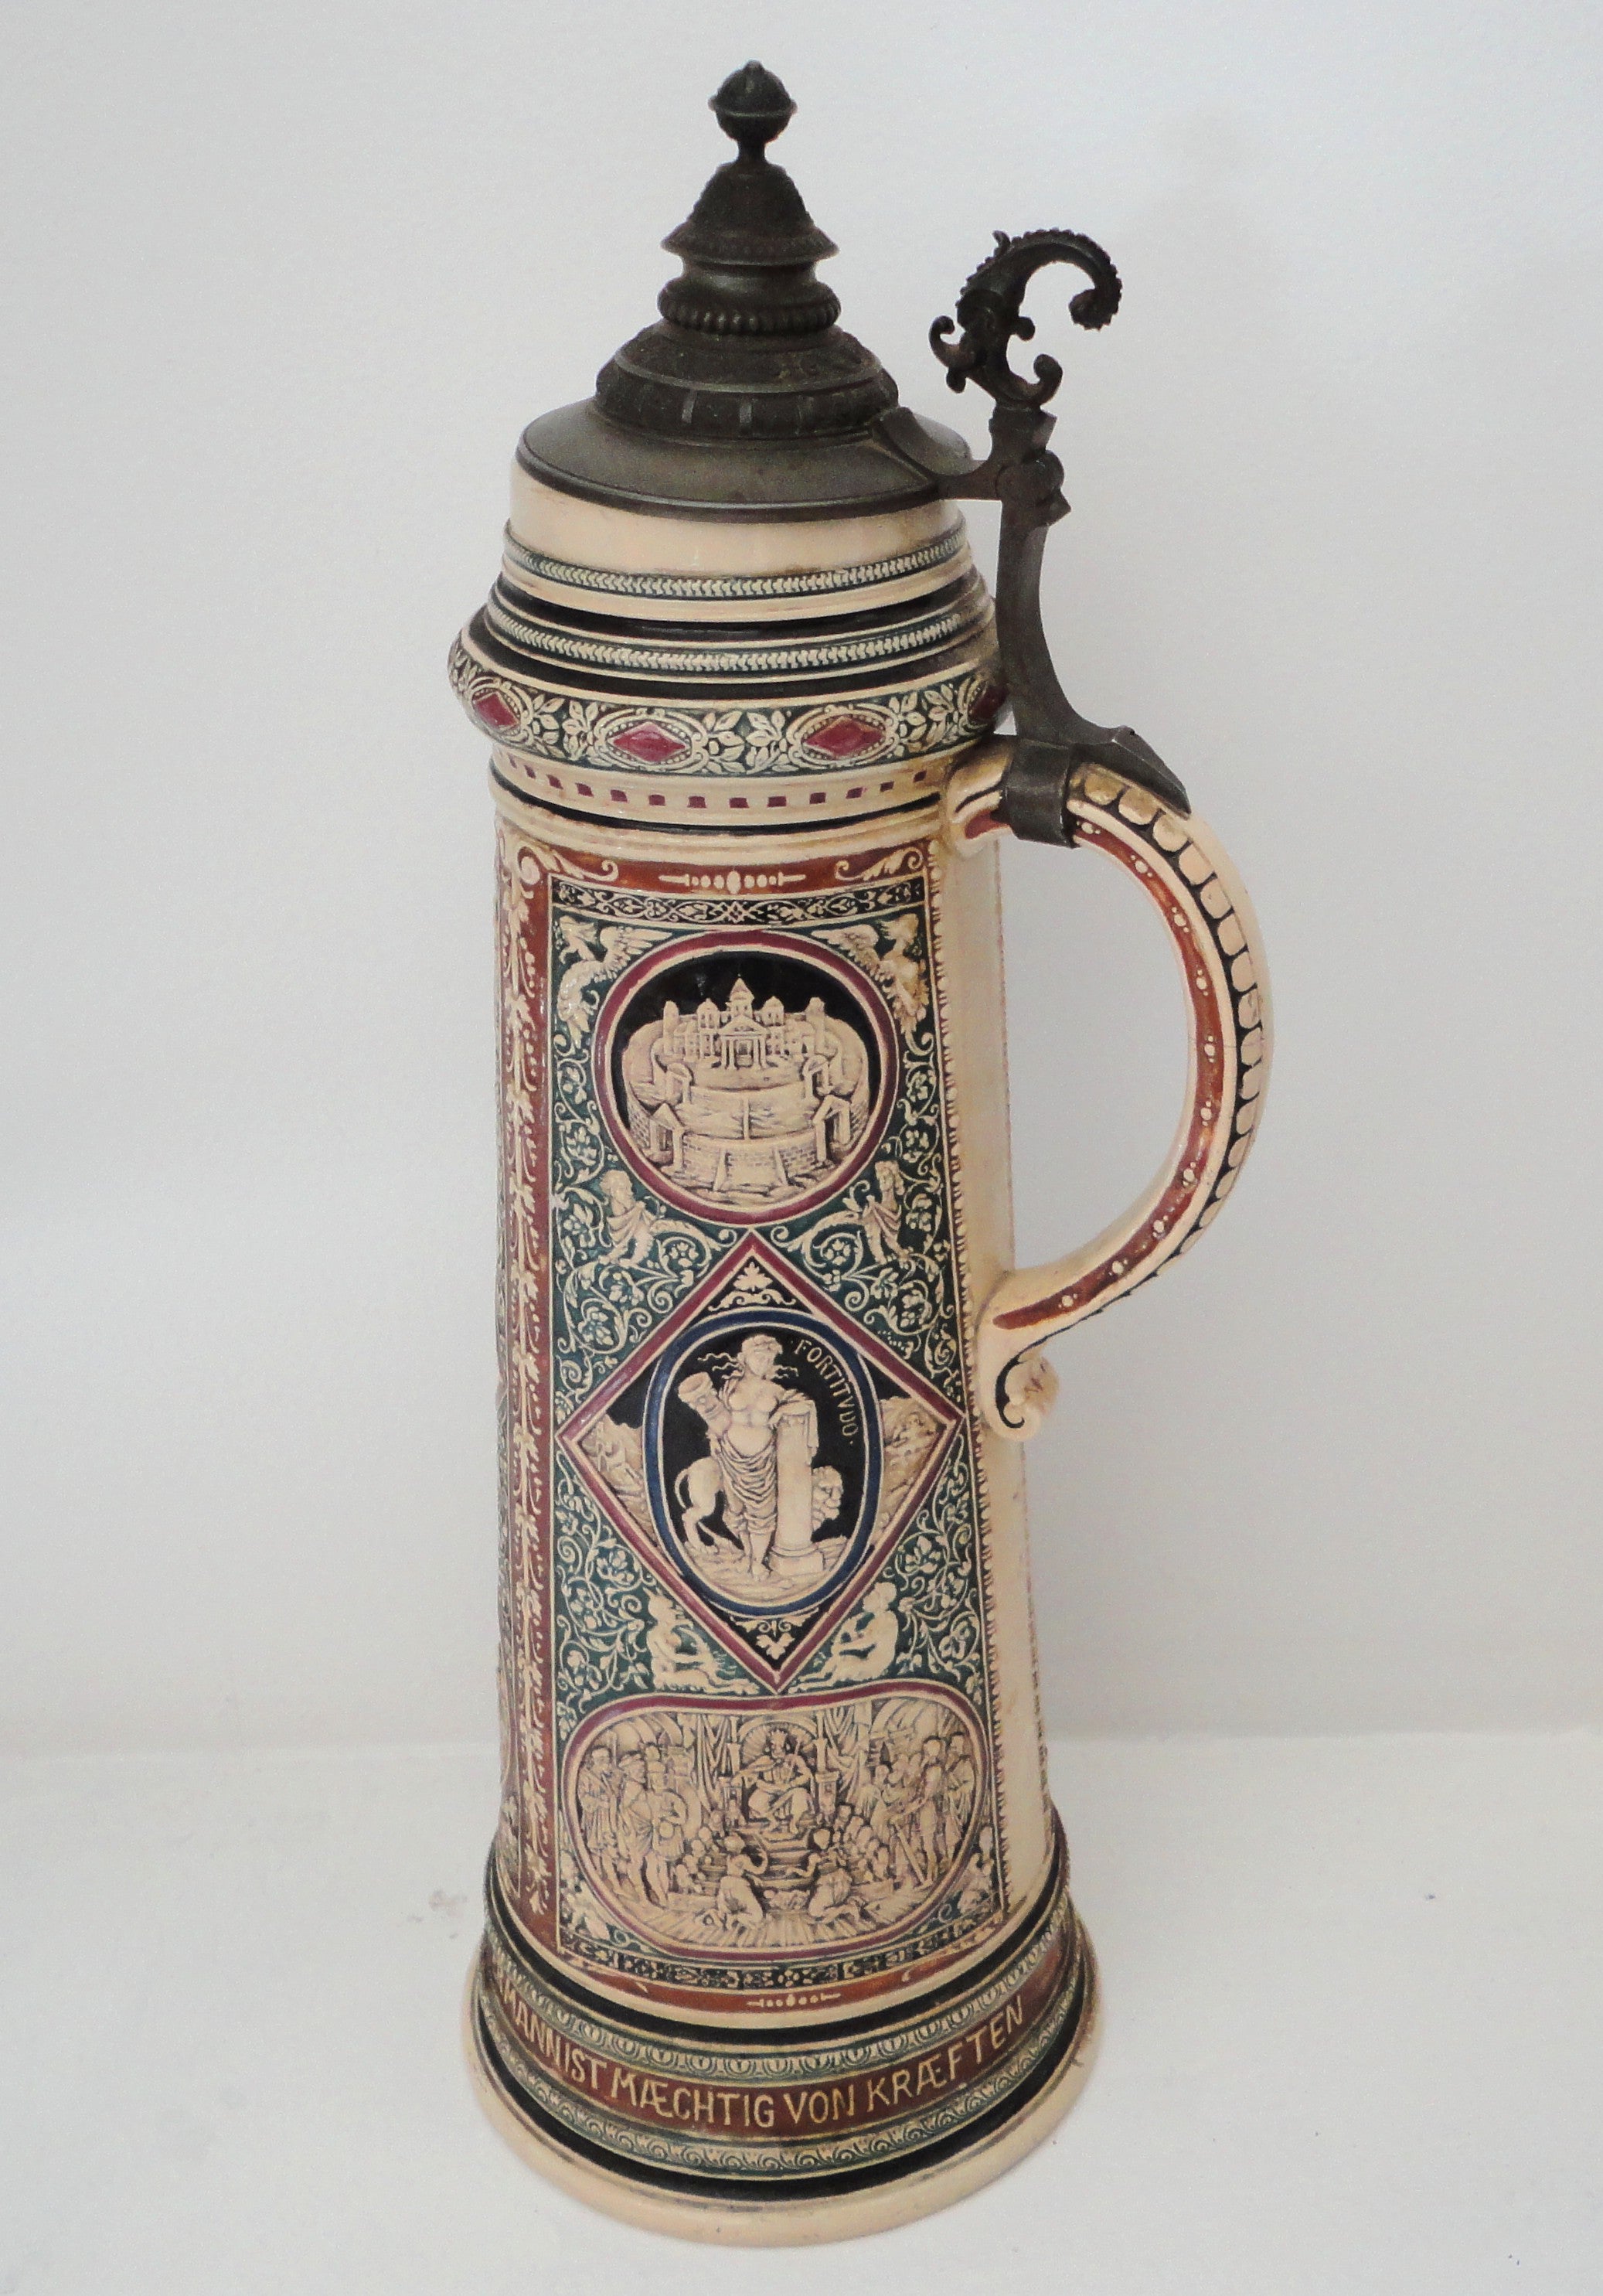 Rare & Early 19thc Monumental German Beer Stein